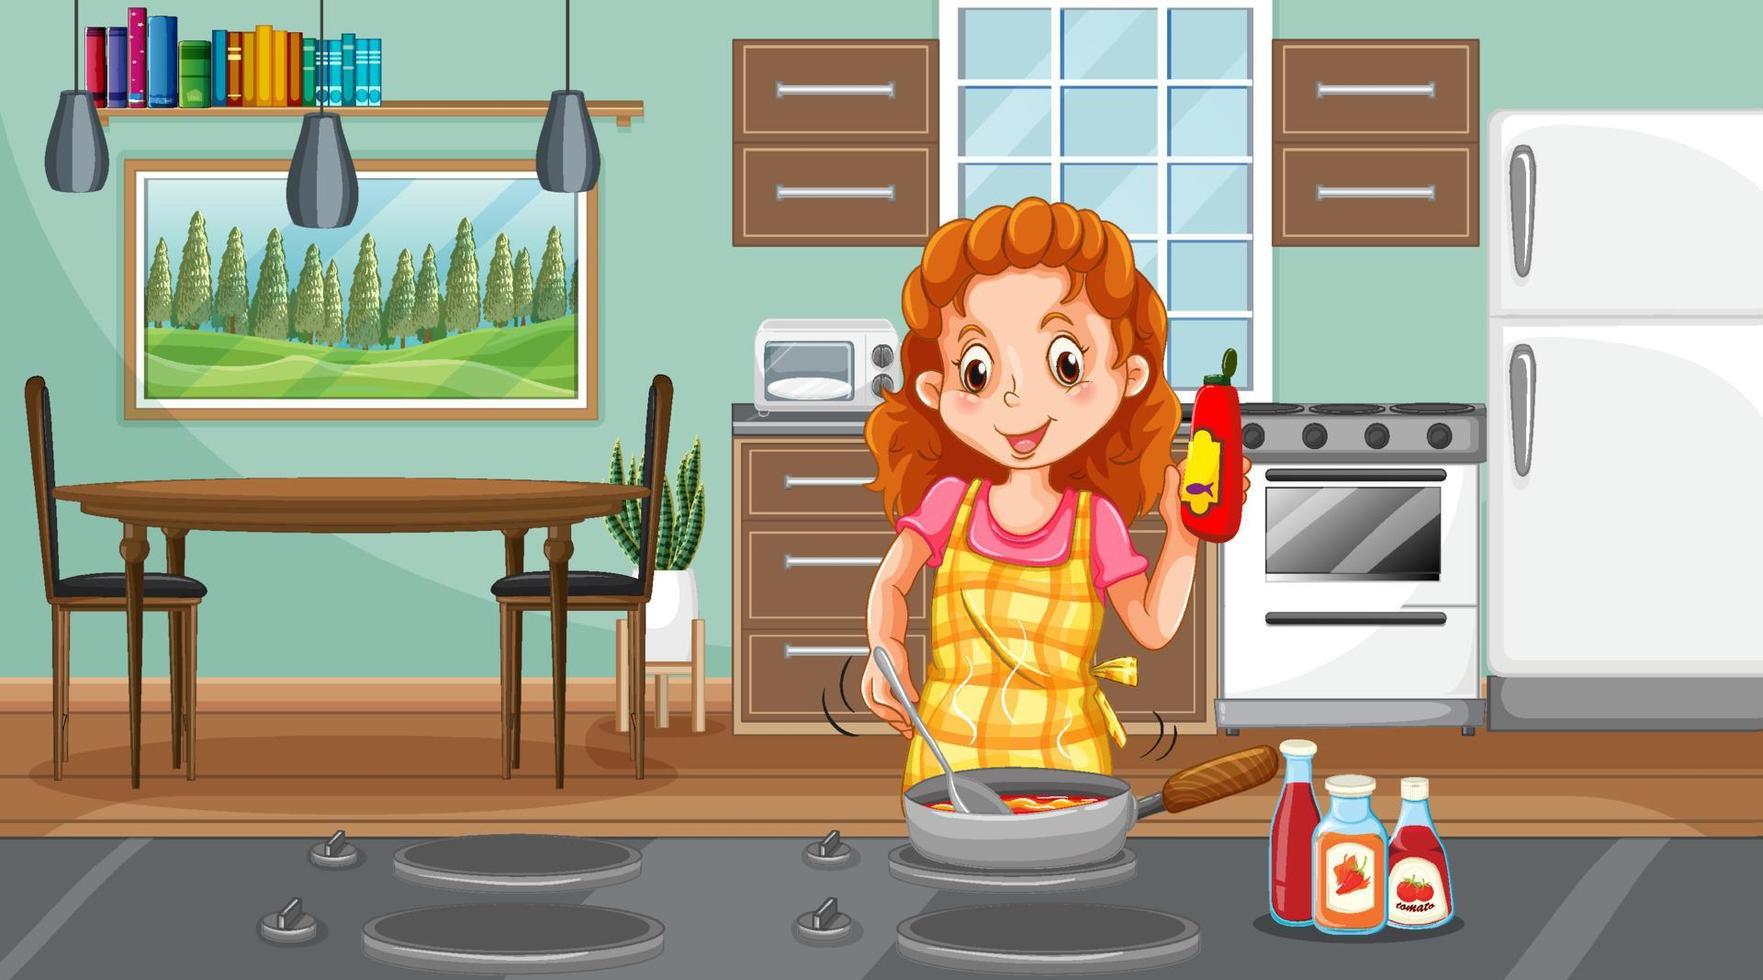 A happy woman cooking in the kitchen scene vector